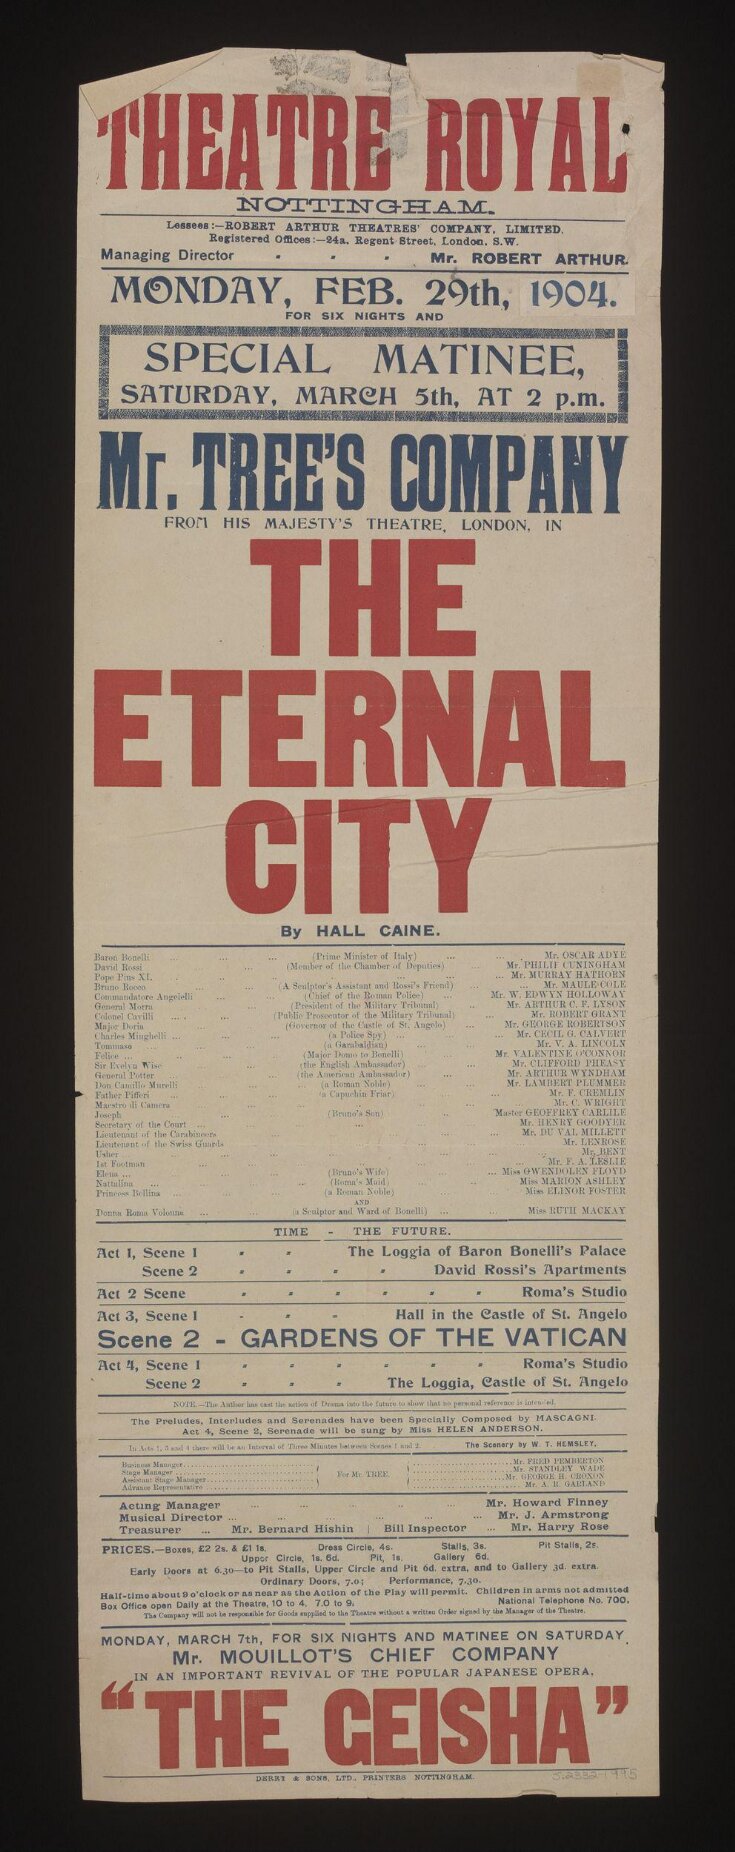 The Eternal City poster top image